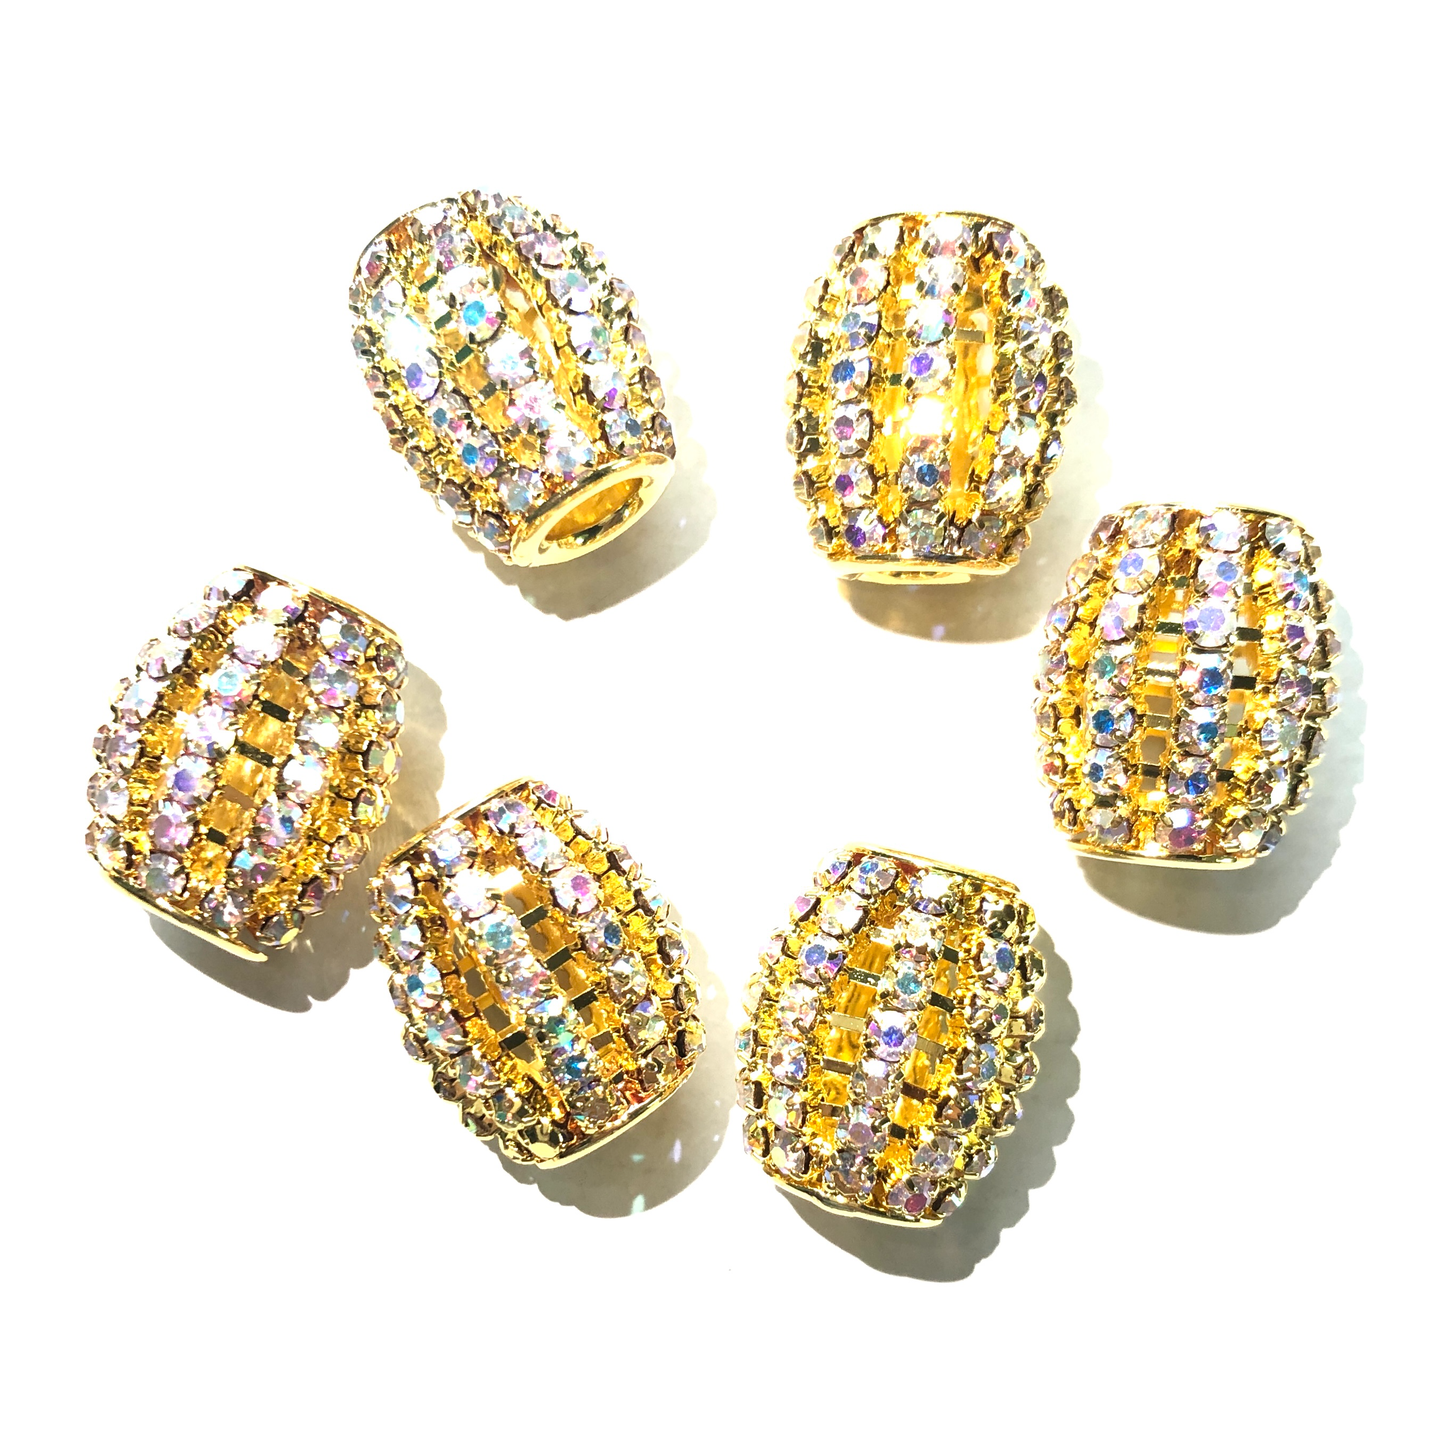 20pcs/lot 18*15mm Clear AB & Multicolor Rhinestone Alloy Olive Spacers Clear AB on Gold Alloy Spacers Colorful Zirconia New Spacers Arrivals Charms Beads Beyond